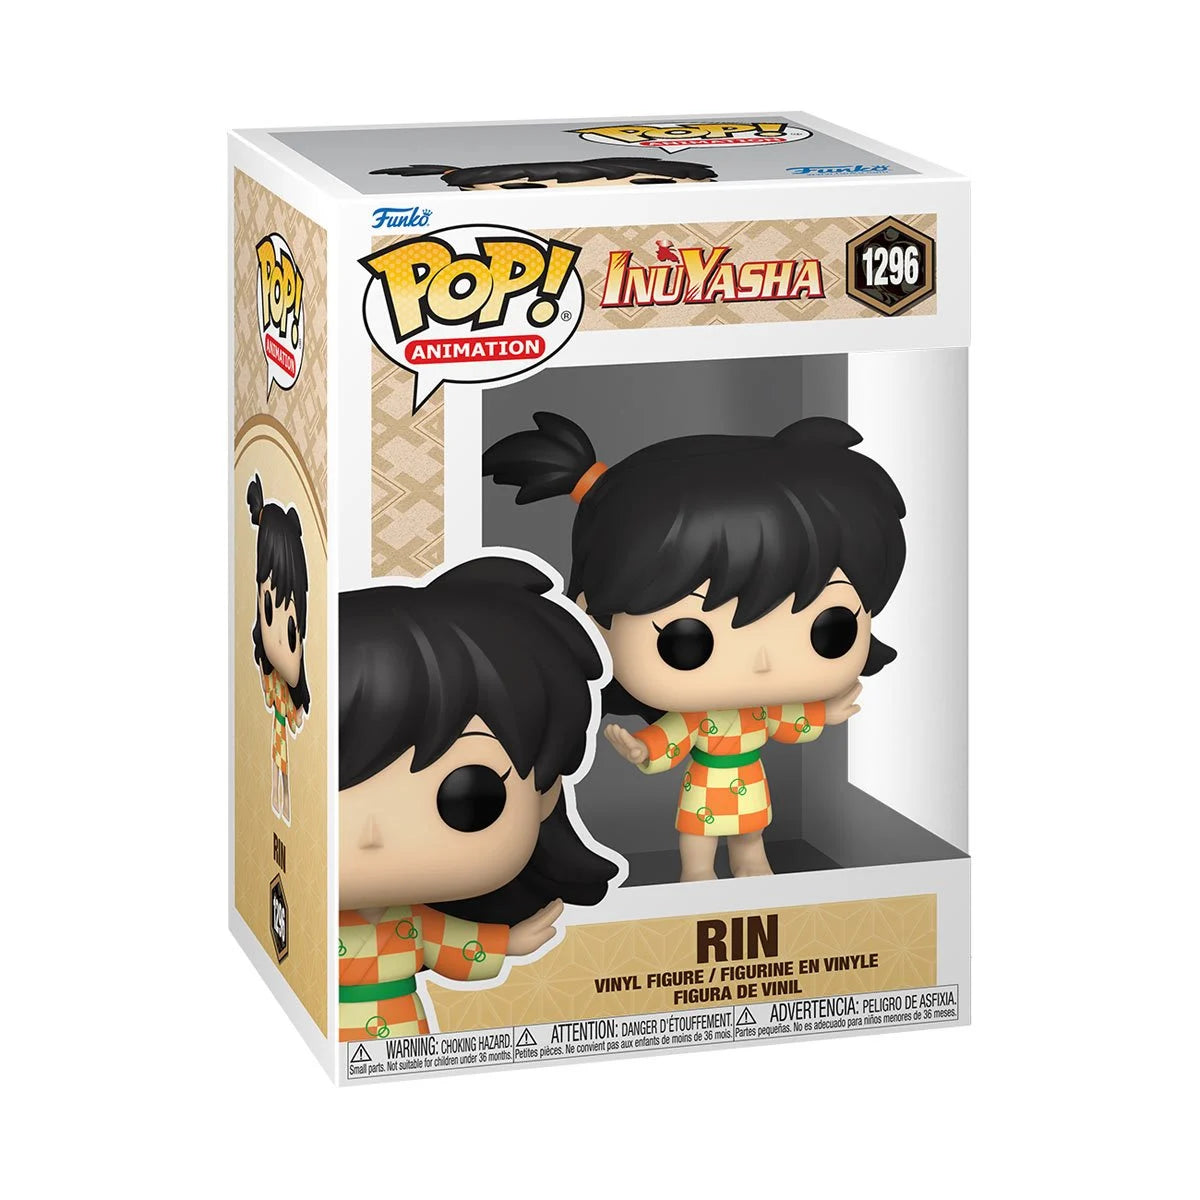 Inuyasha Rin Pop! Vinyl Figure #1296 in a box front view - Heretoserveyou